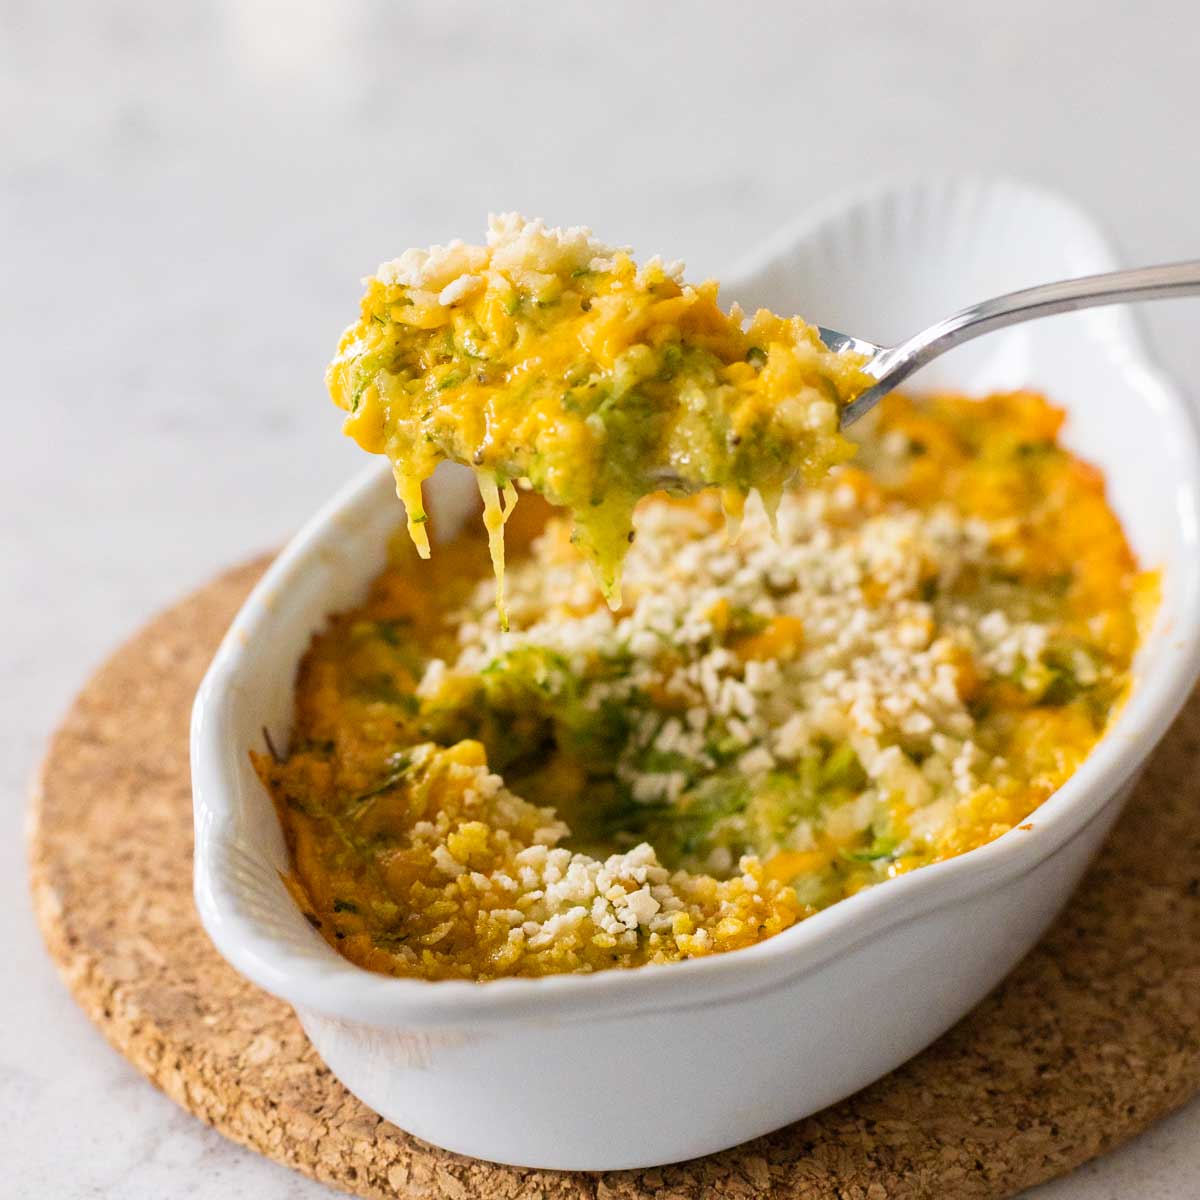 A spoon is pulling up a bite of the cheesy zucchini gratin so you can see the melted cheese pull.